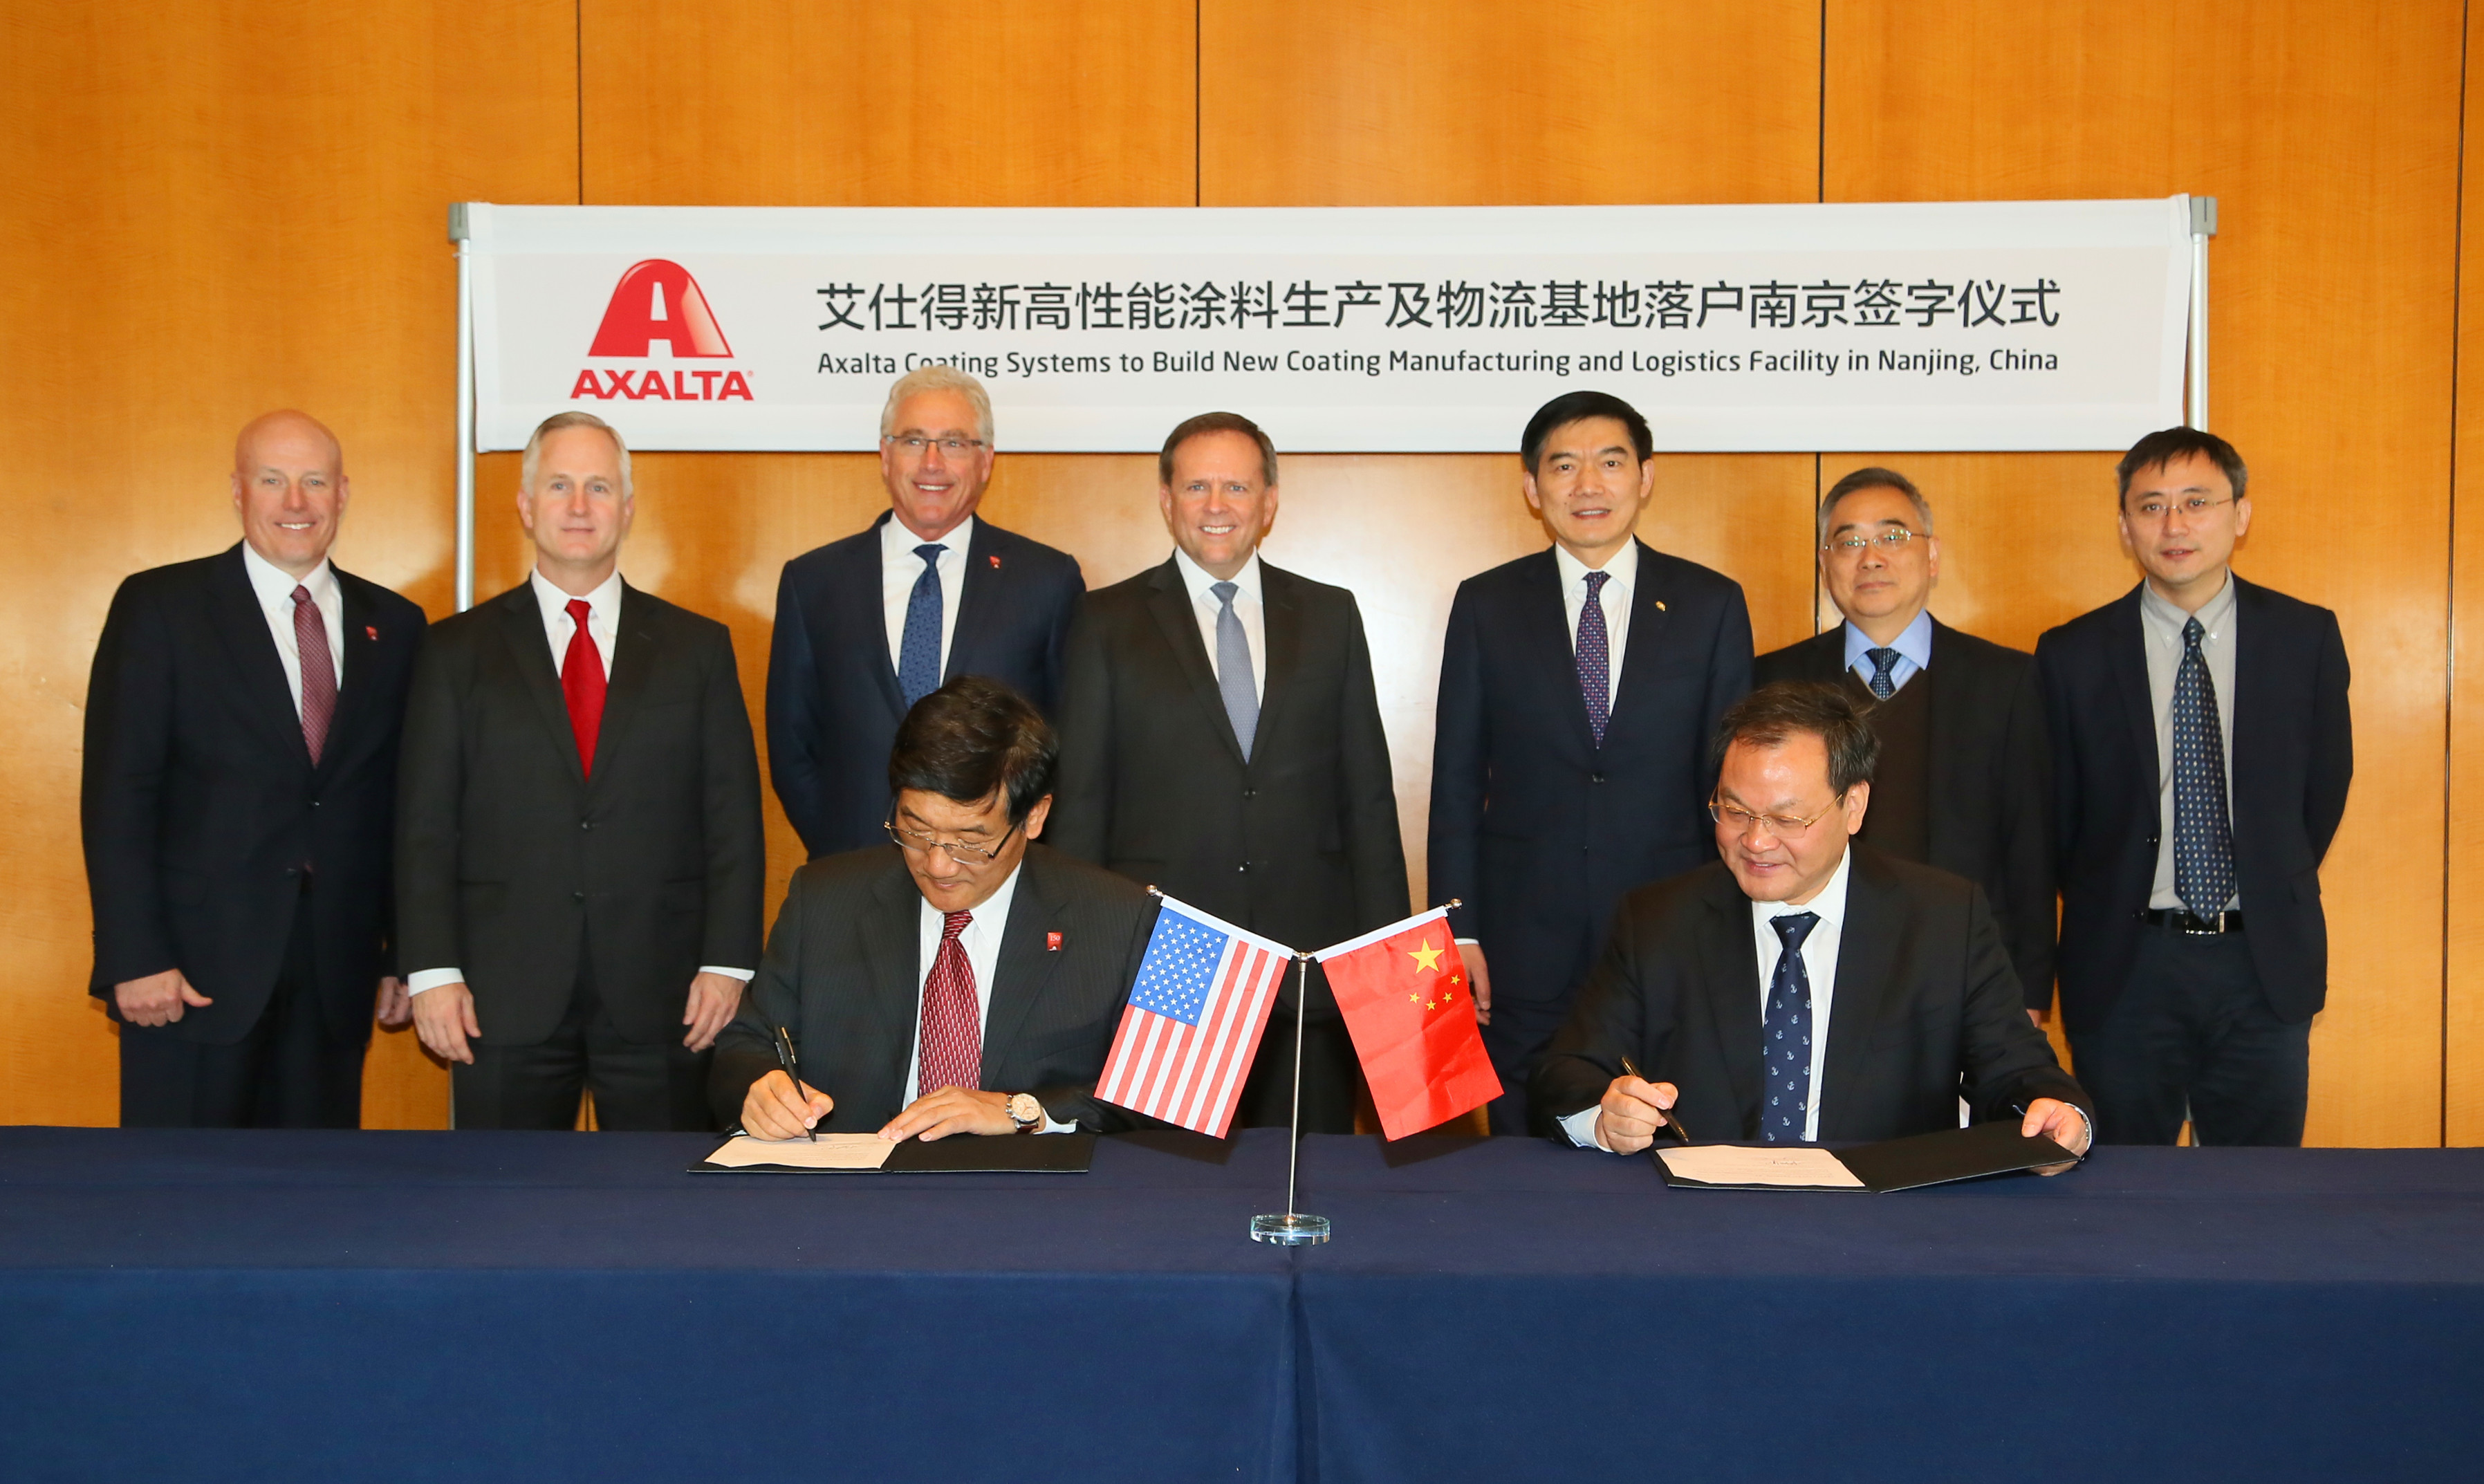 Axalta to build new coating manufacturing and logistics facility in Nanjing, China